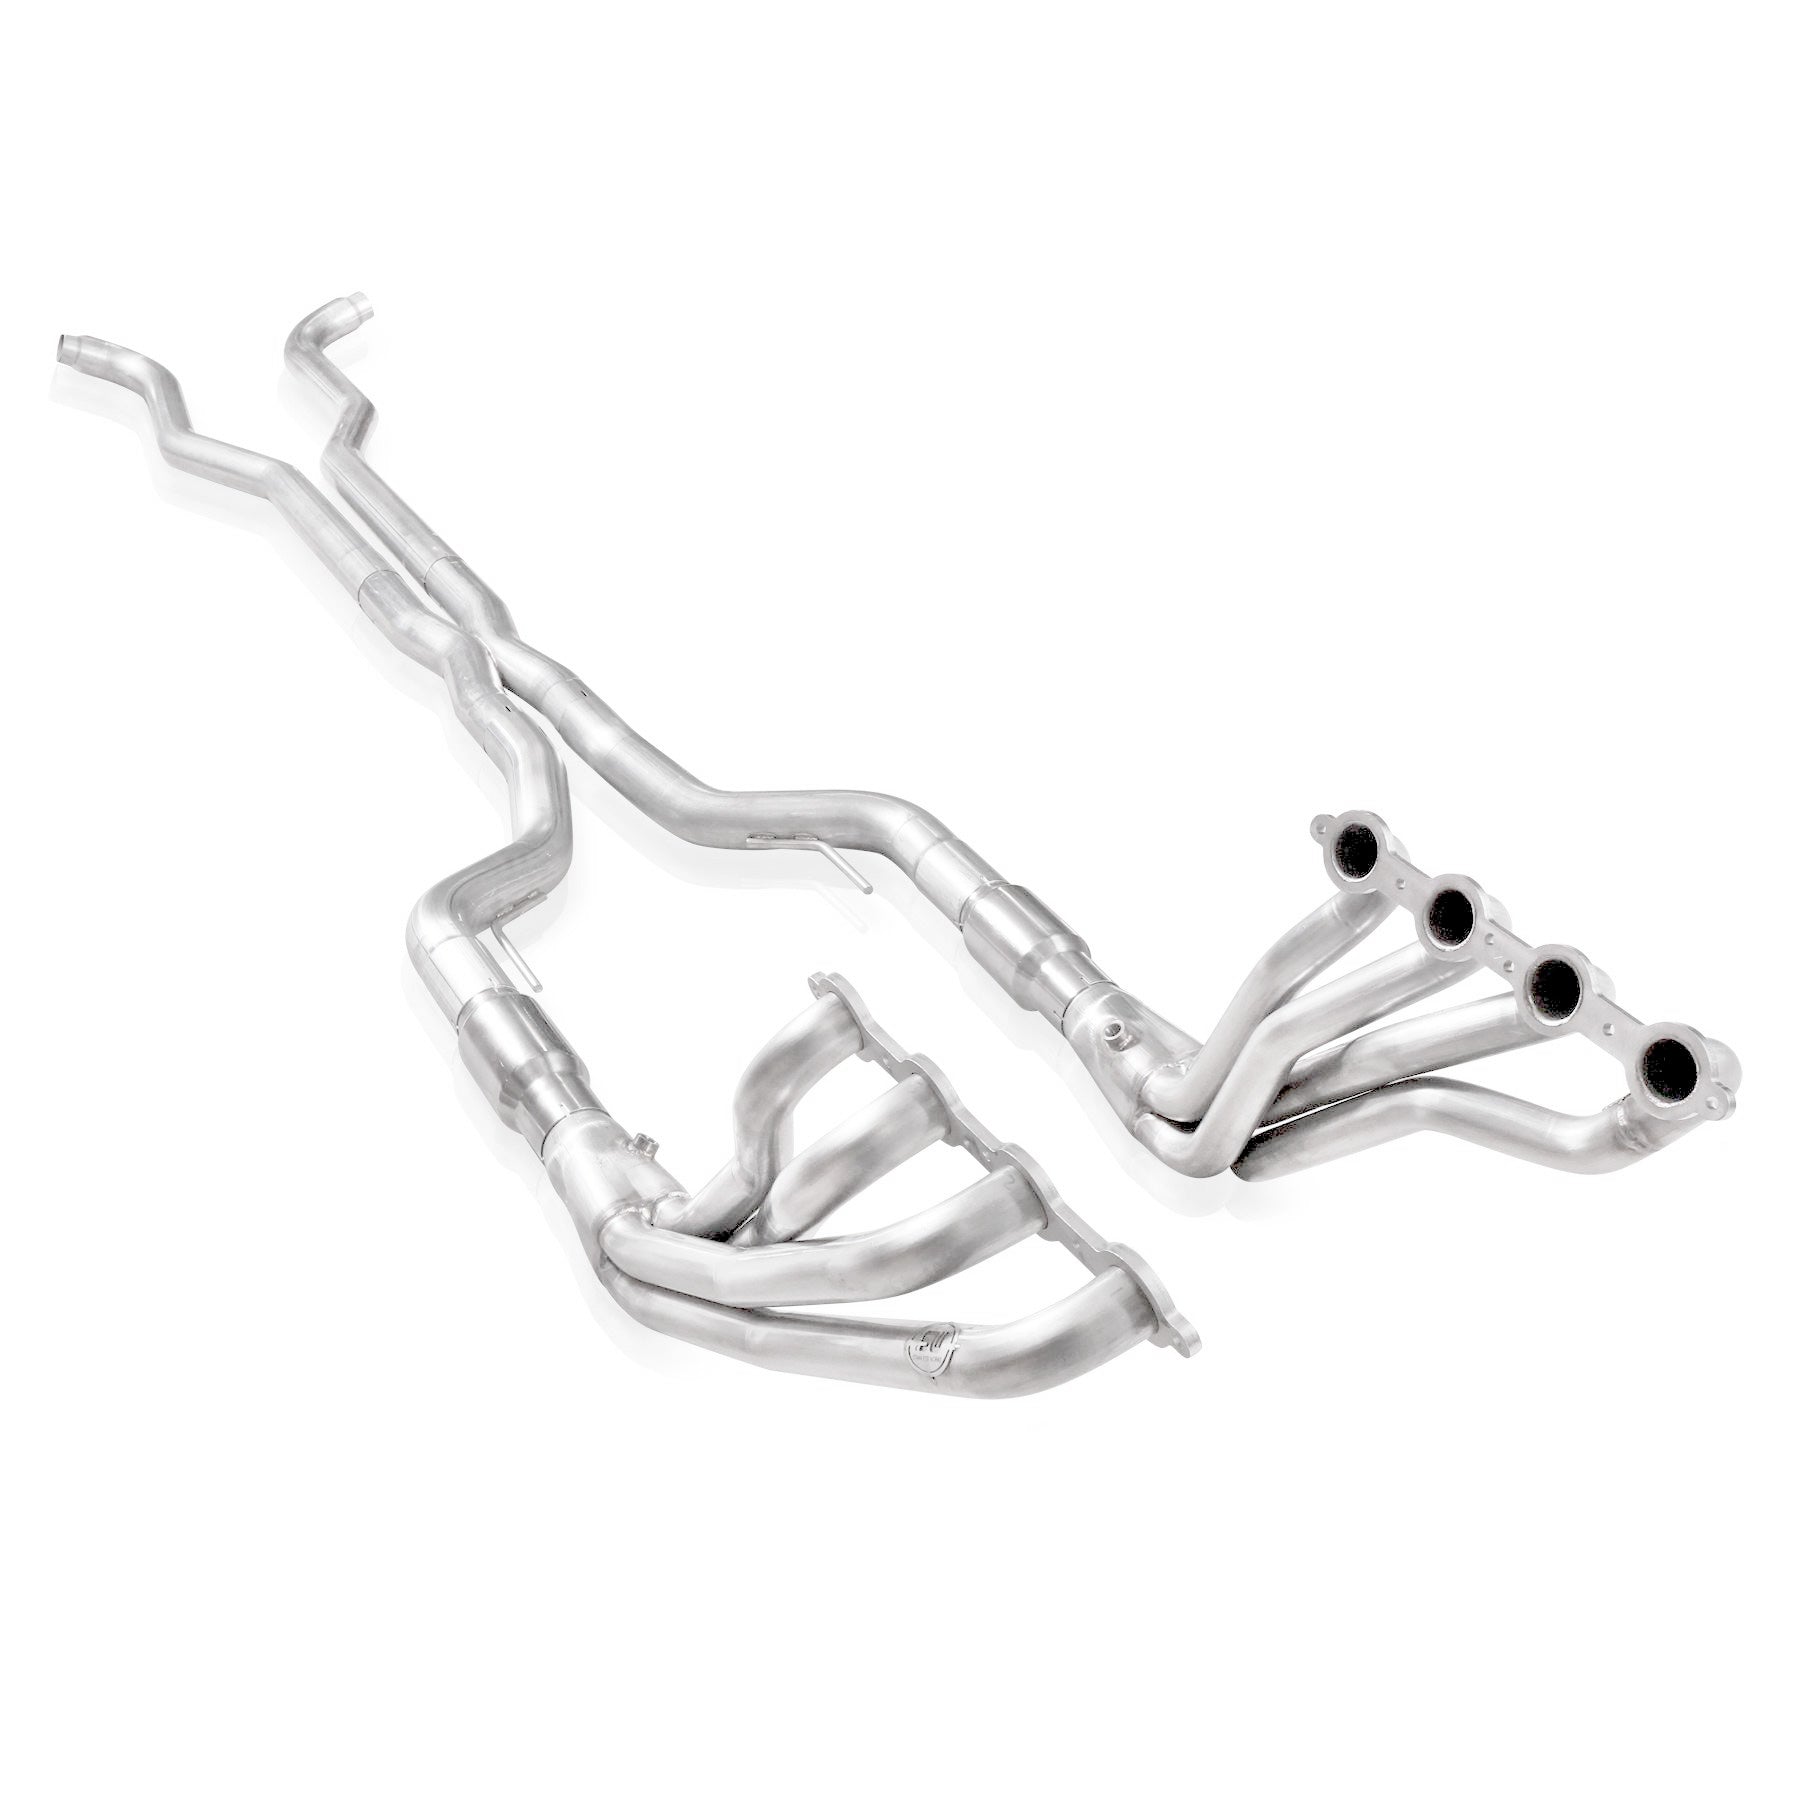 Stainless Works - 2014-2017 Chevy SS Long Tube Header Kit - The Speed Depot